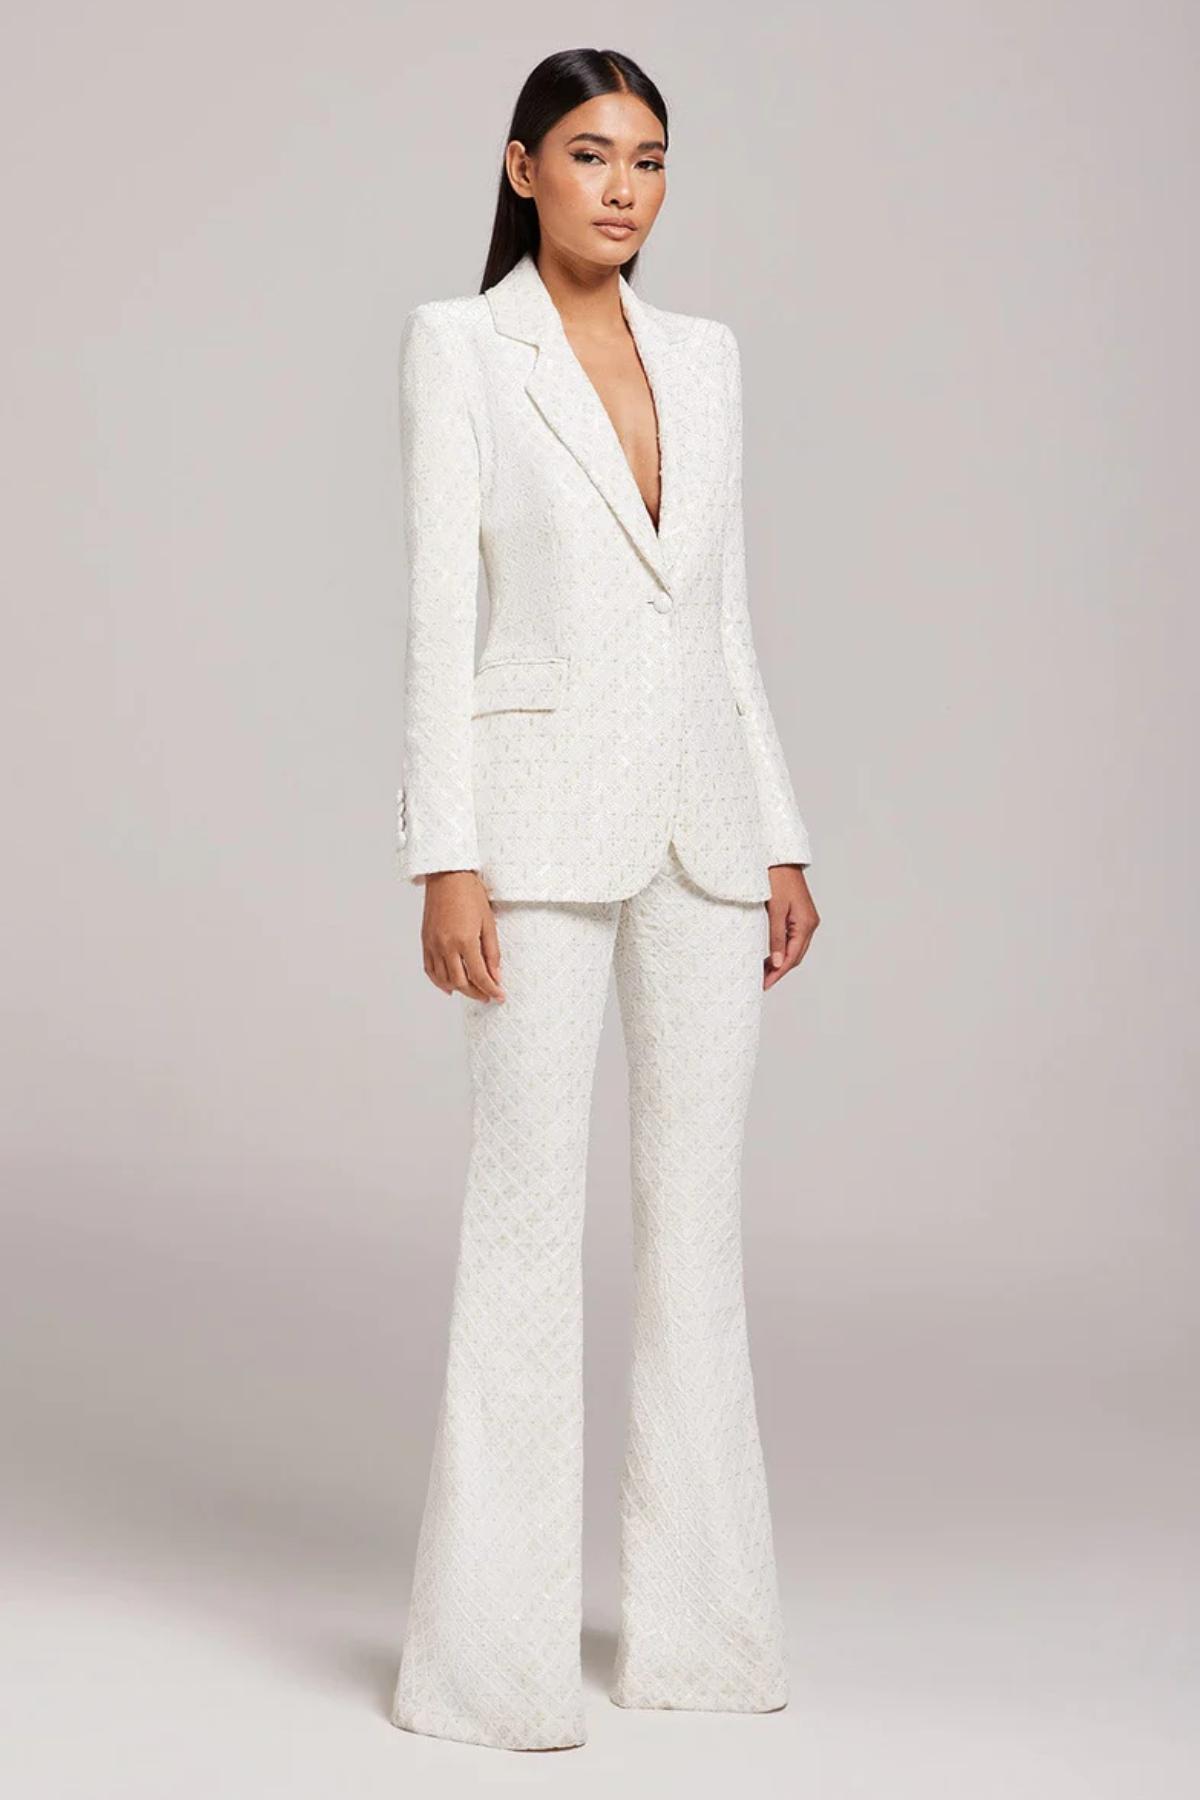 25 amazing bridesmaid pant suits that are perfect for a wedding 